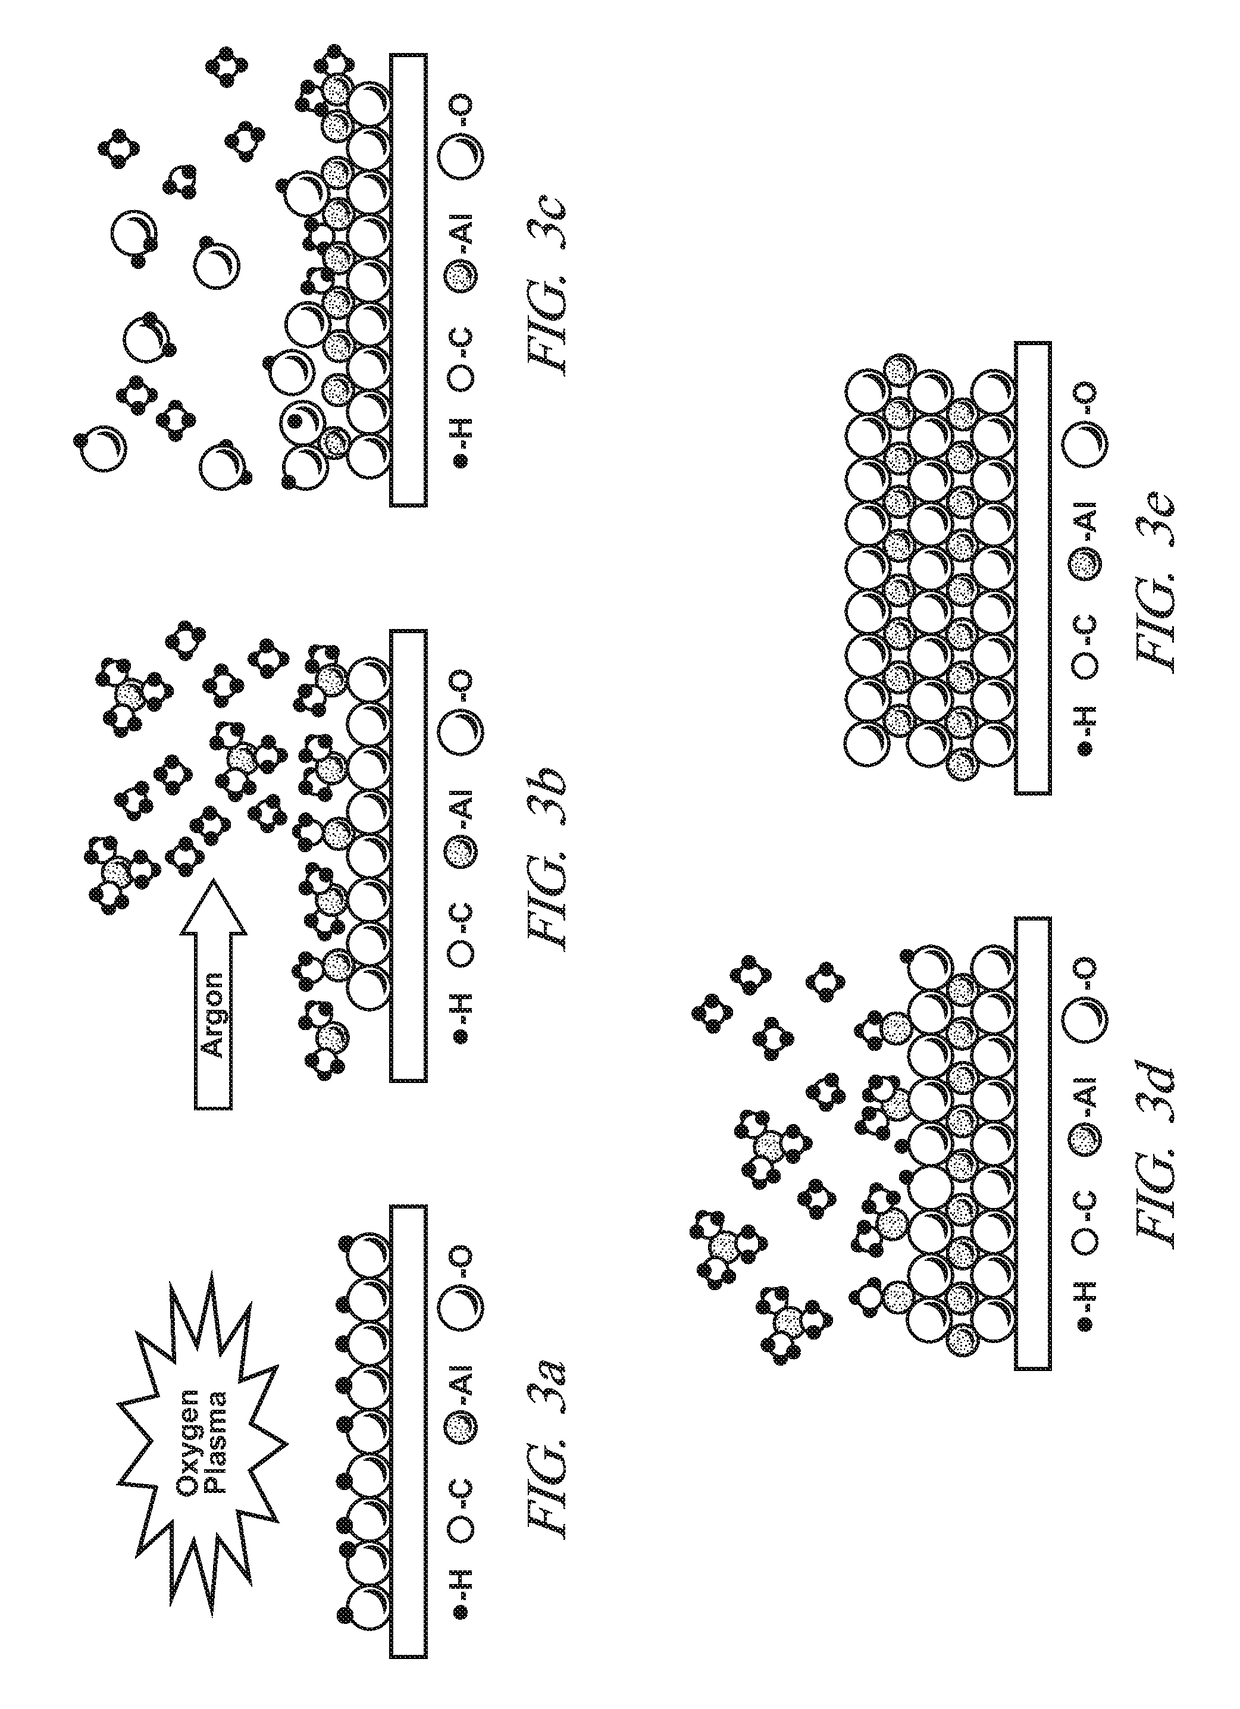 Lithium-ion batteries with coated separators